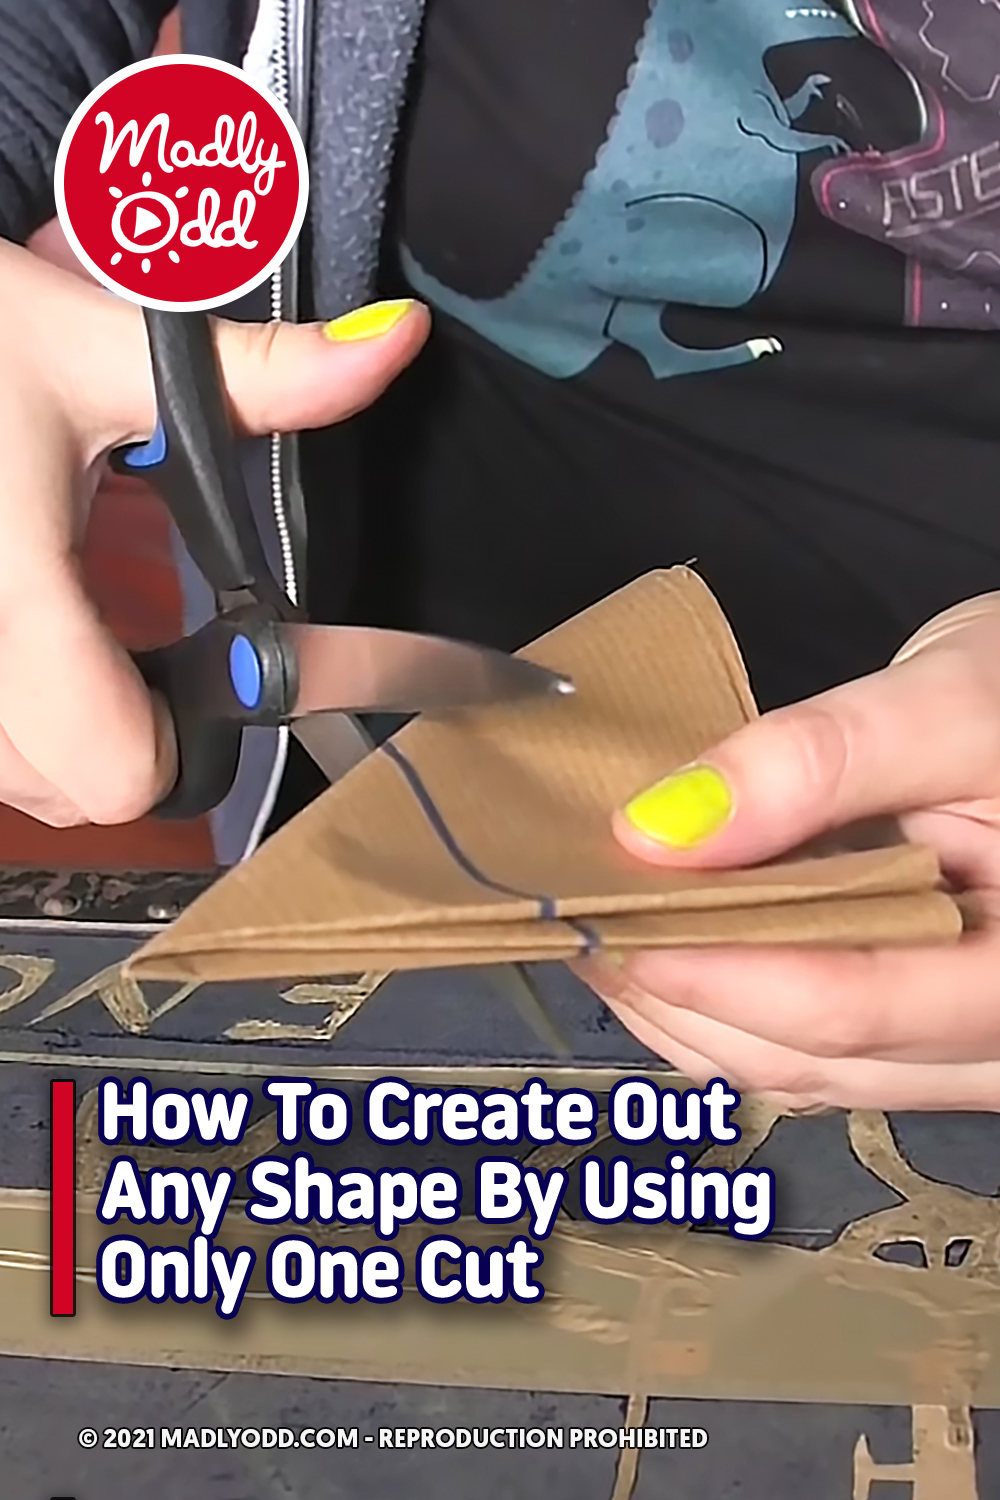 How To Create Out Any Shape By Using Only One Cut